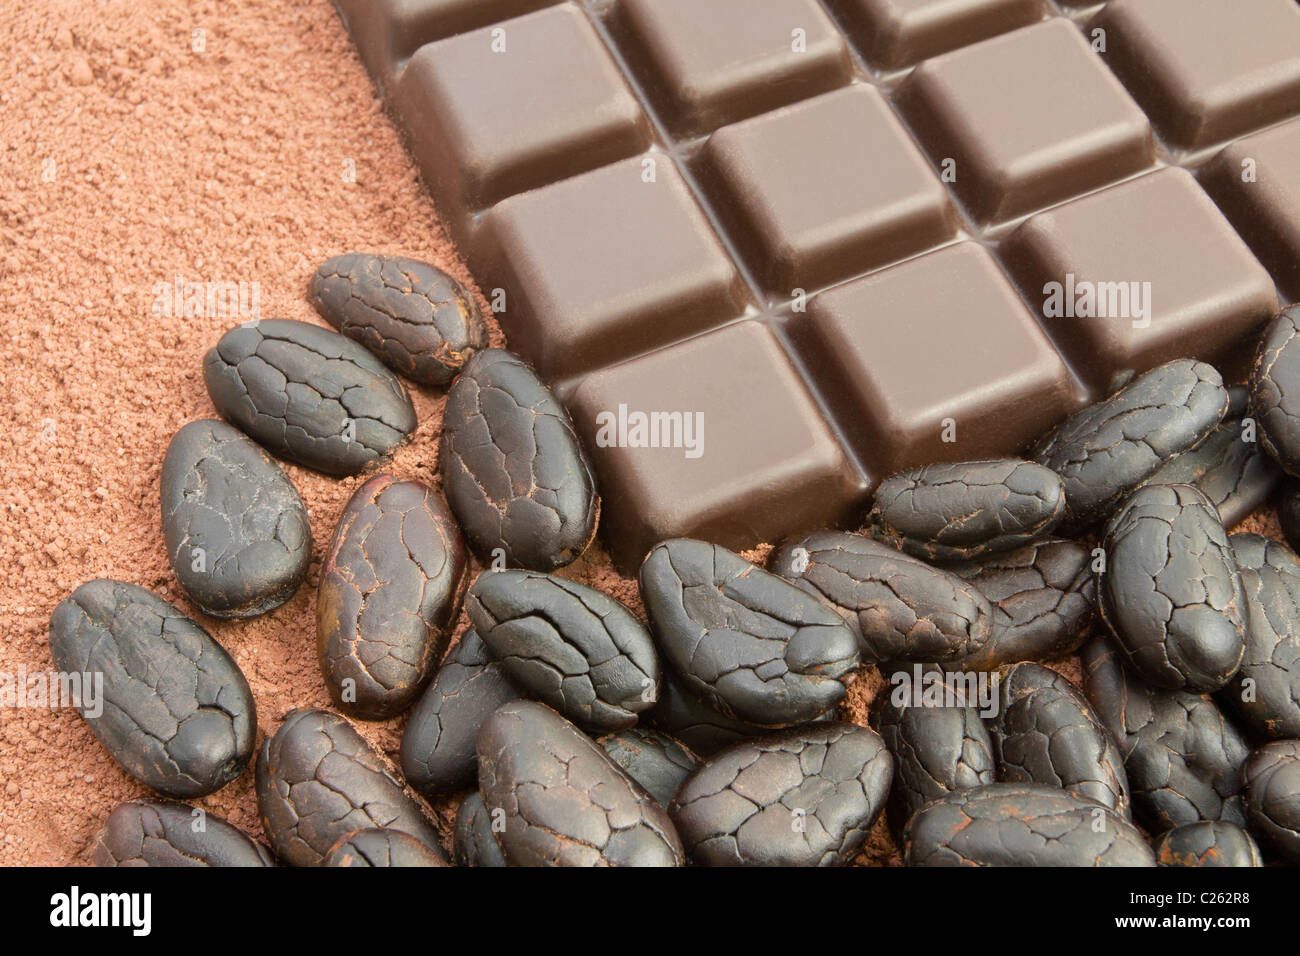 Bar of chocolate, cocoa powder and cocoa beans Stock Photo